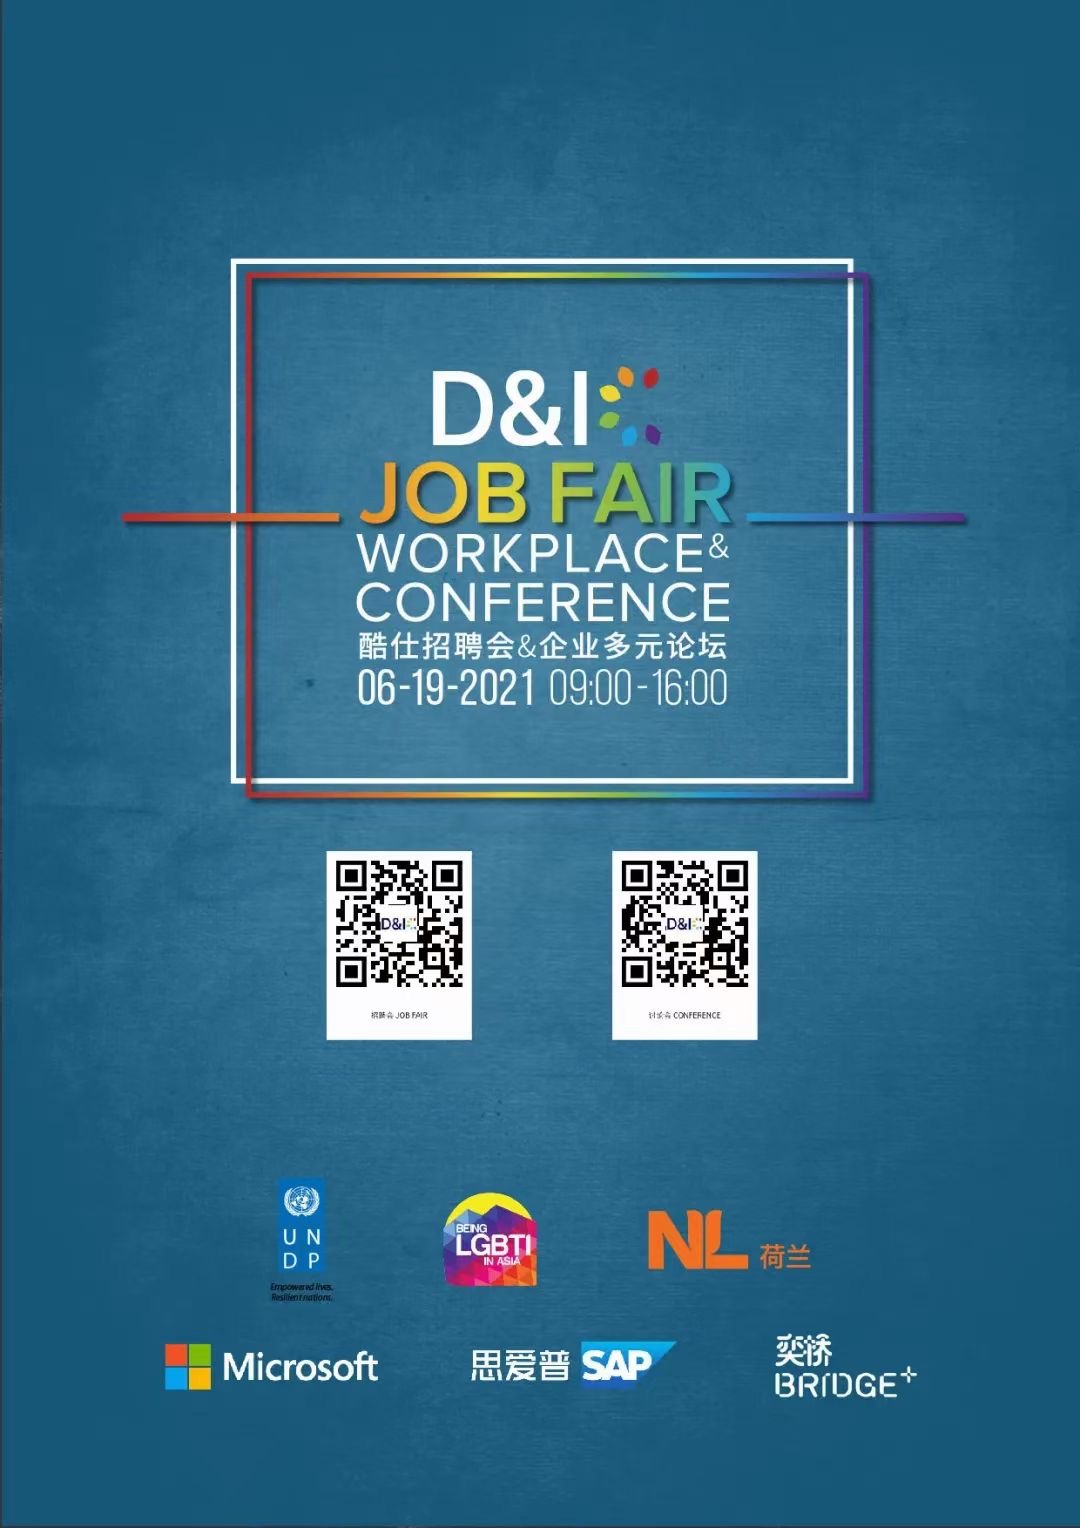 D&I Job Fair Workplace& Conference